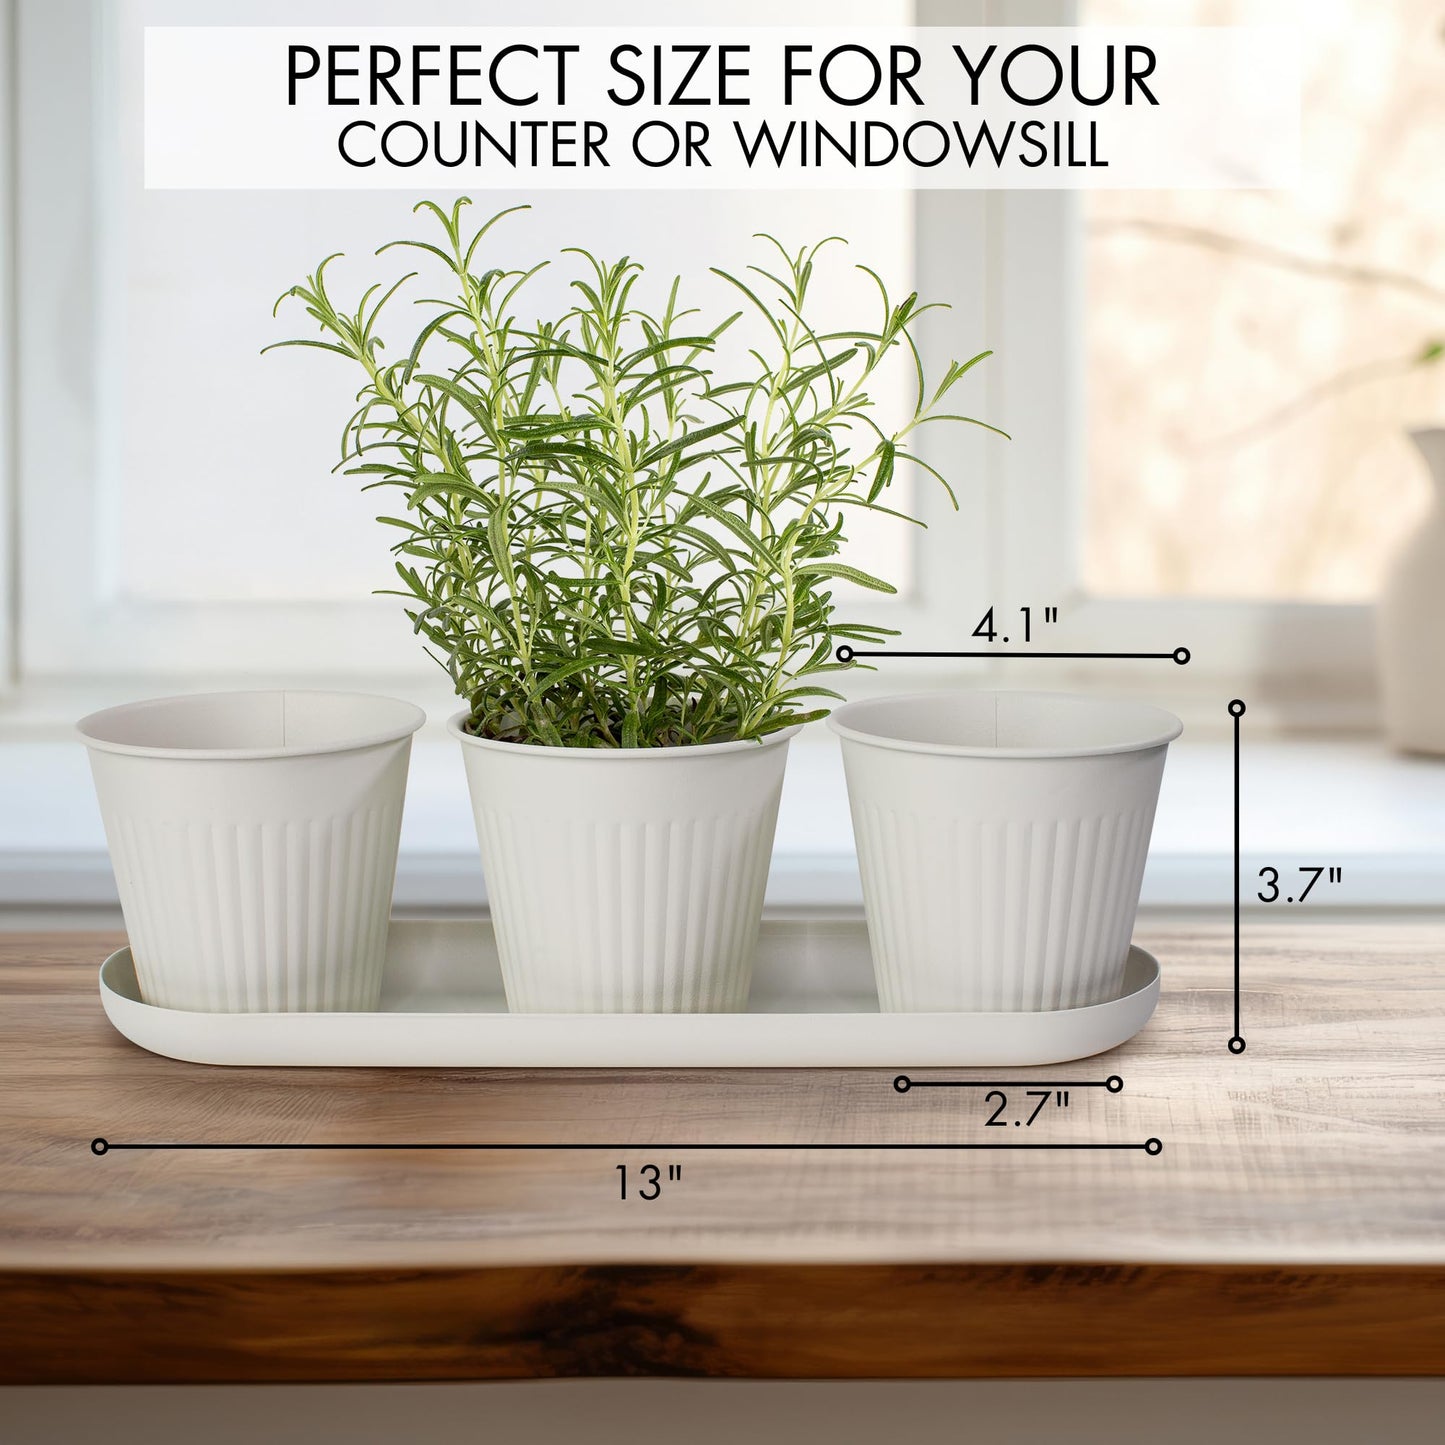 Beautiful Indoor Herb Planter Set of 3 - Perfect Set to Grow Your Fresh Herbs at Home - A Modern Gardening Planter Kit for Your Kitchen Window Sill Incl. Tray & Drainage Holes for Happy Plants